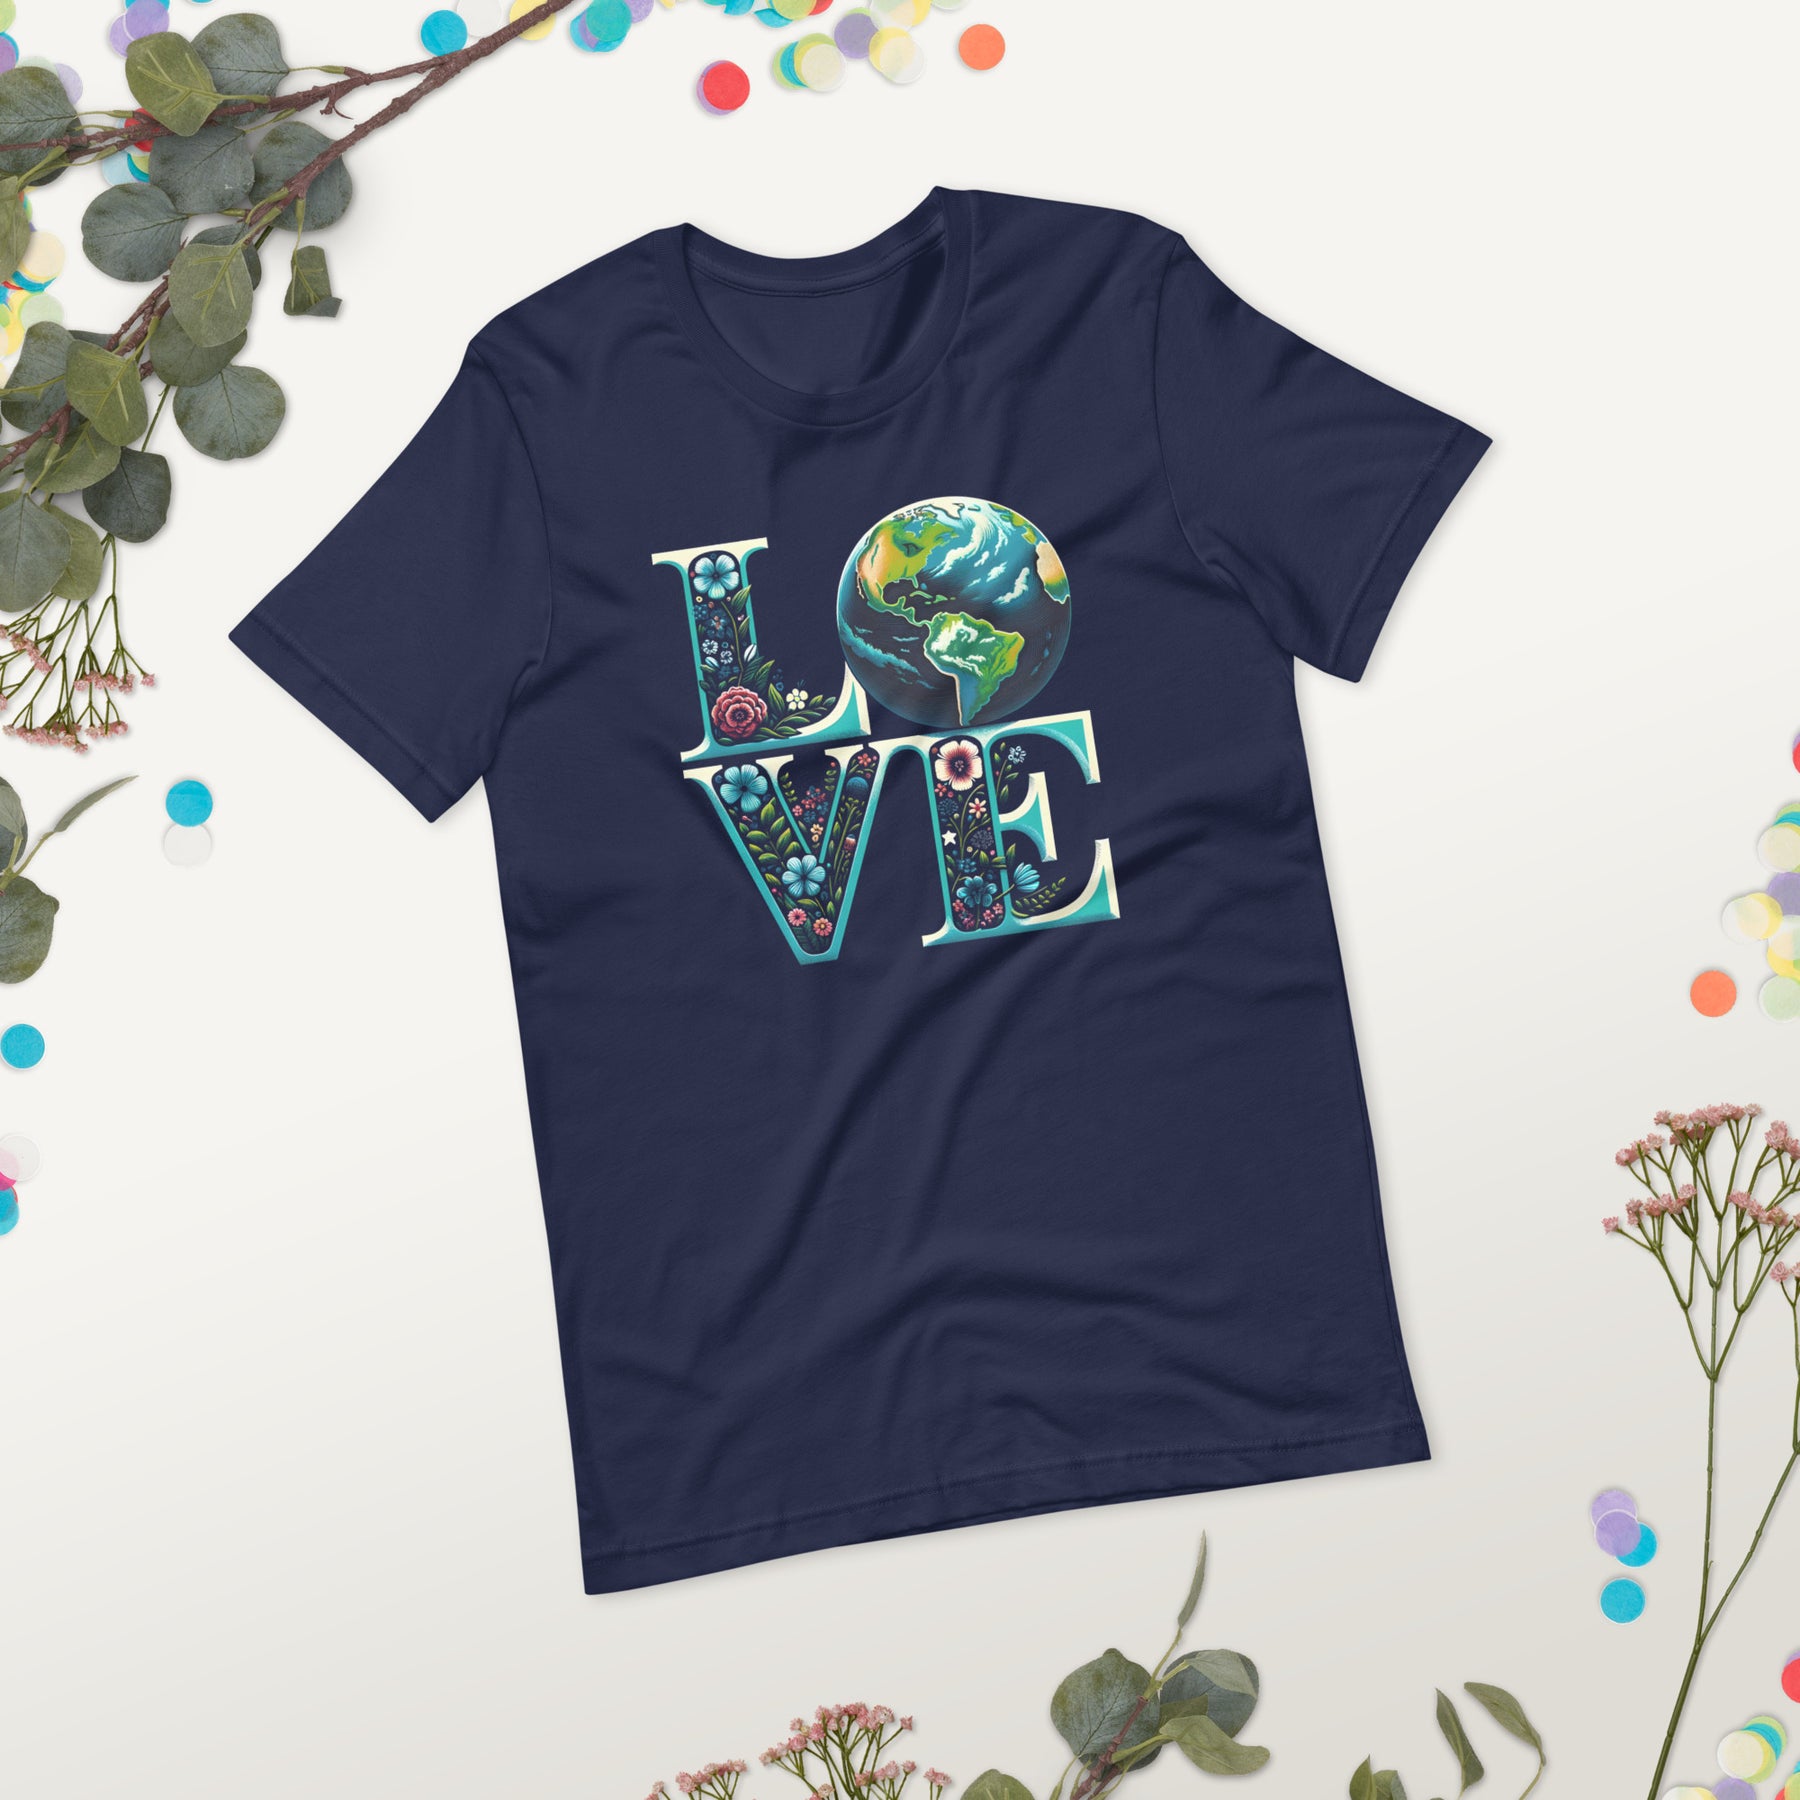 Love Earth Shirt, Celebrate Mother Earth Every Day, Environmental Protection Gift for Climate Advocates